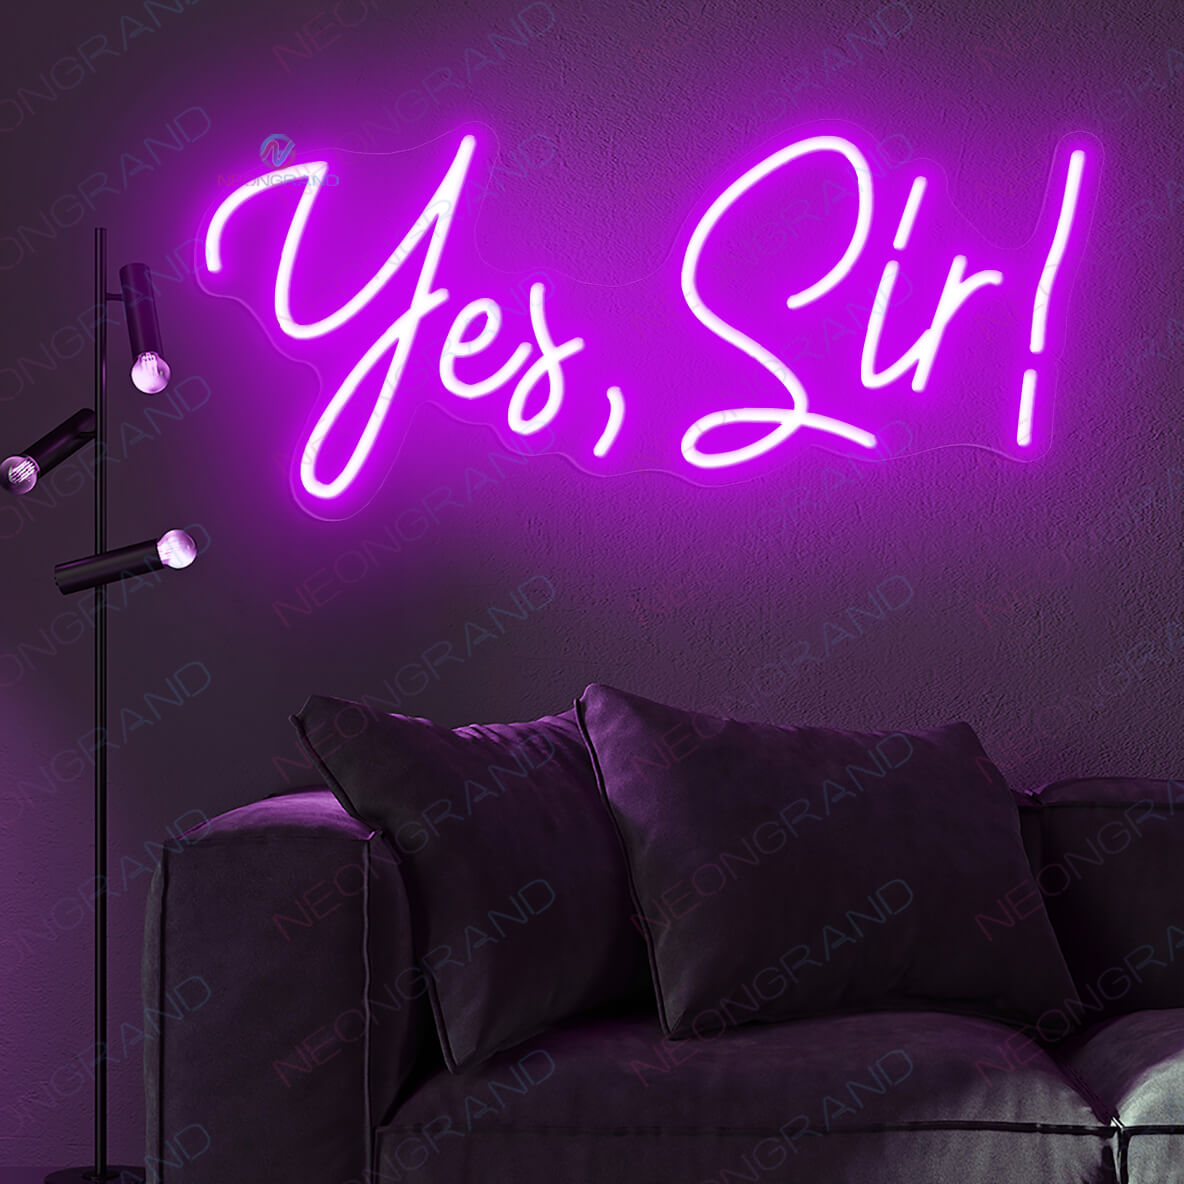 Yes Sir Neon Sign Business Led Light purple